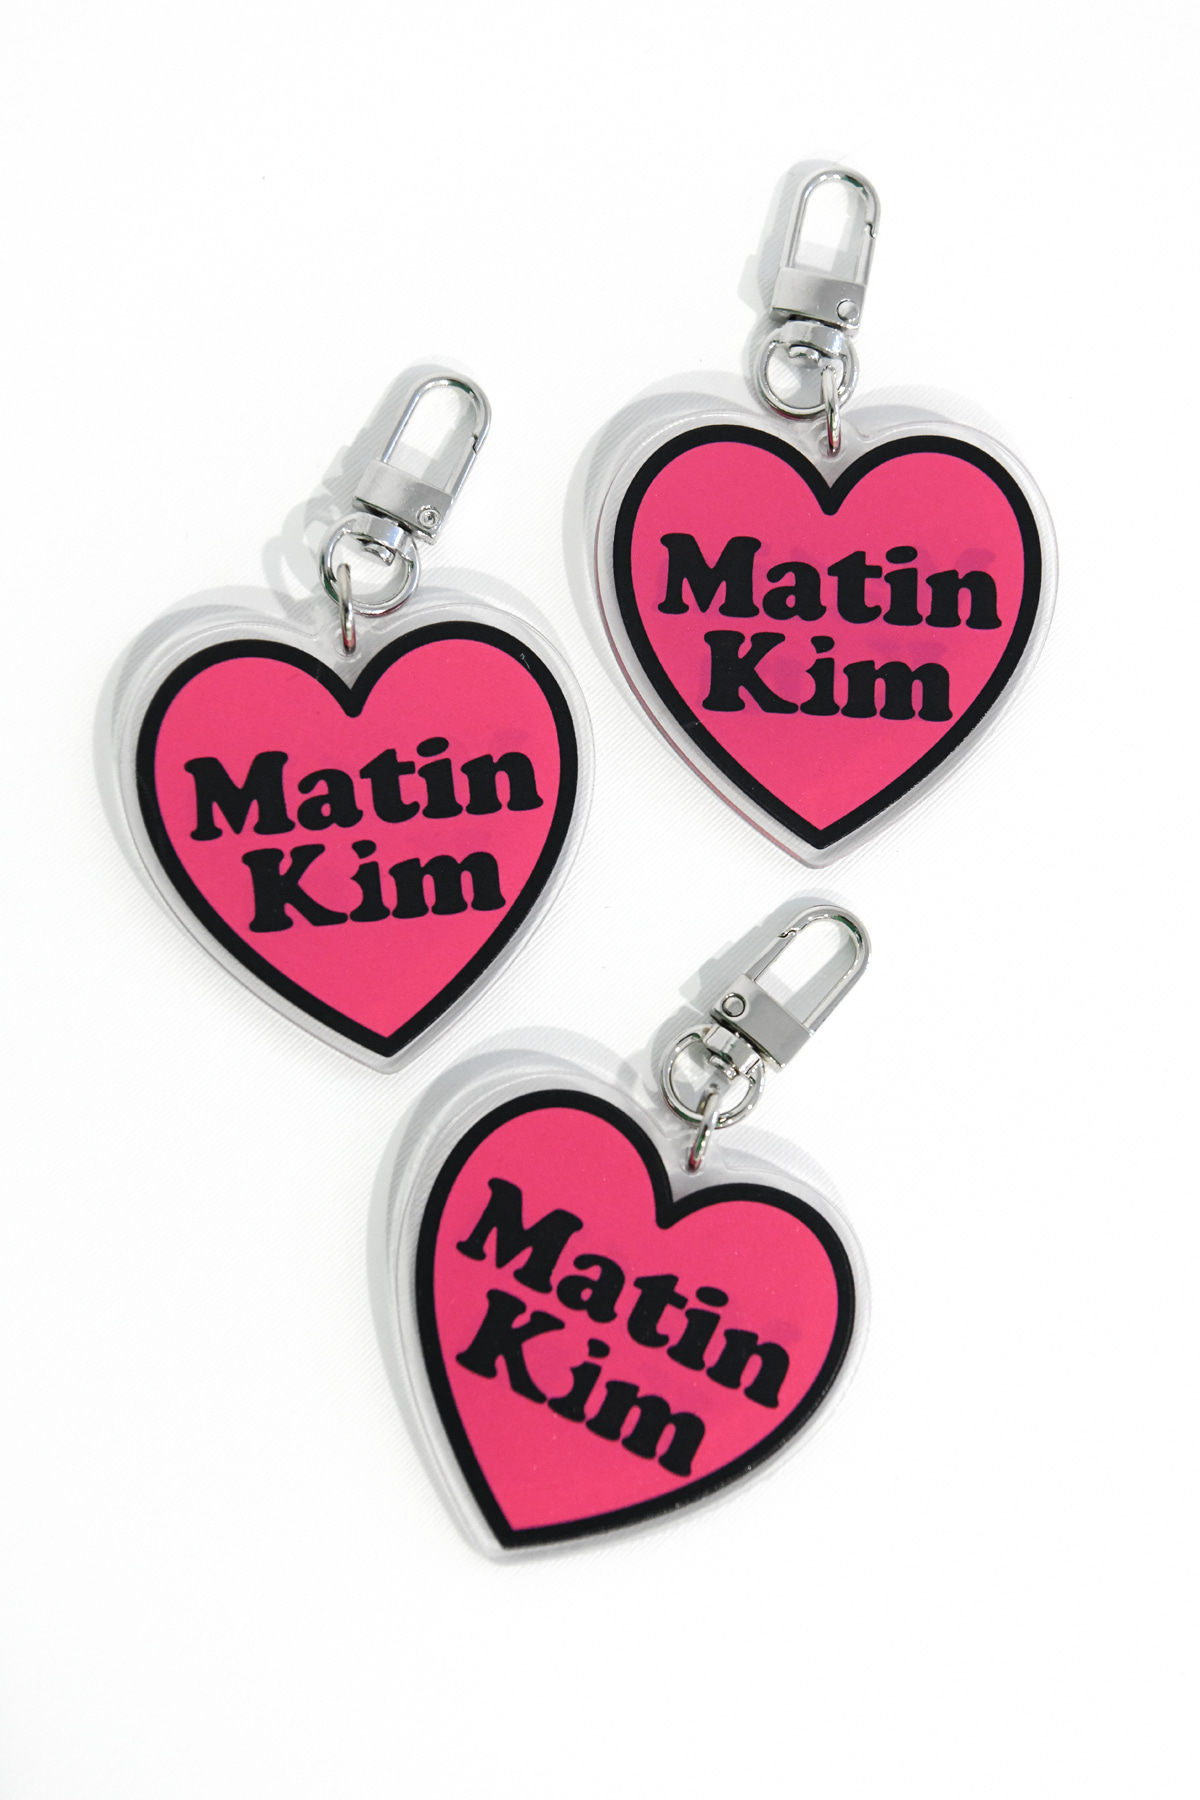 [EXCLUSIVE] MATIN HEART KEY RING IN HOT PINK